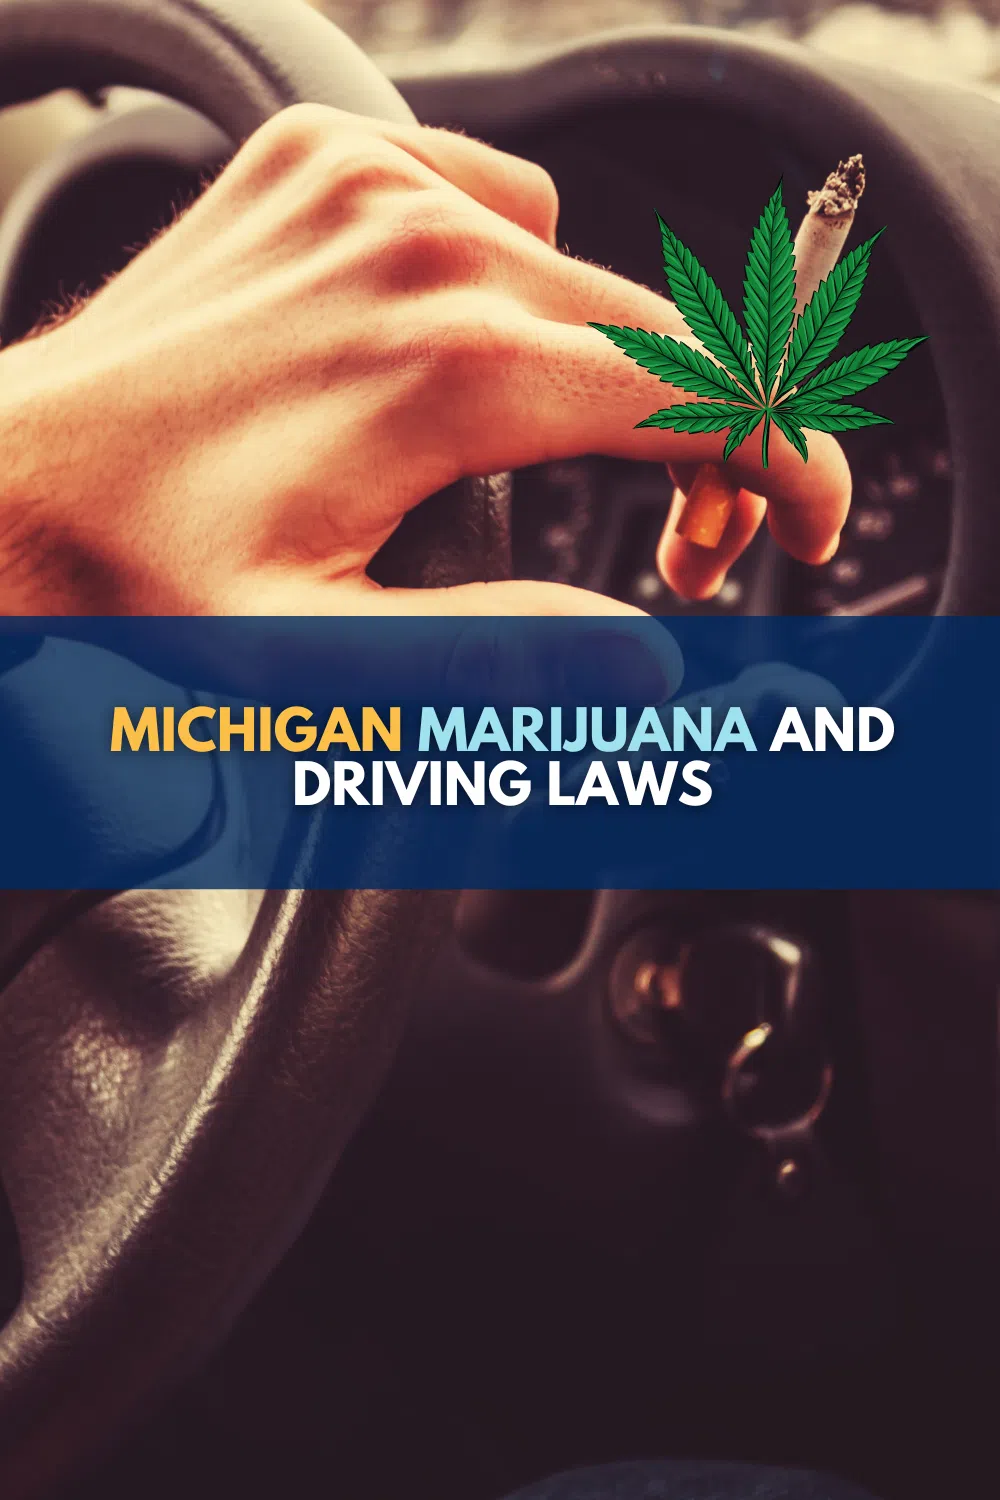 Marijuana and Driving Laws In Michigan: What You Need To Know